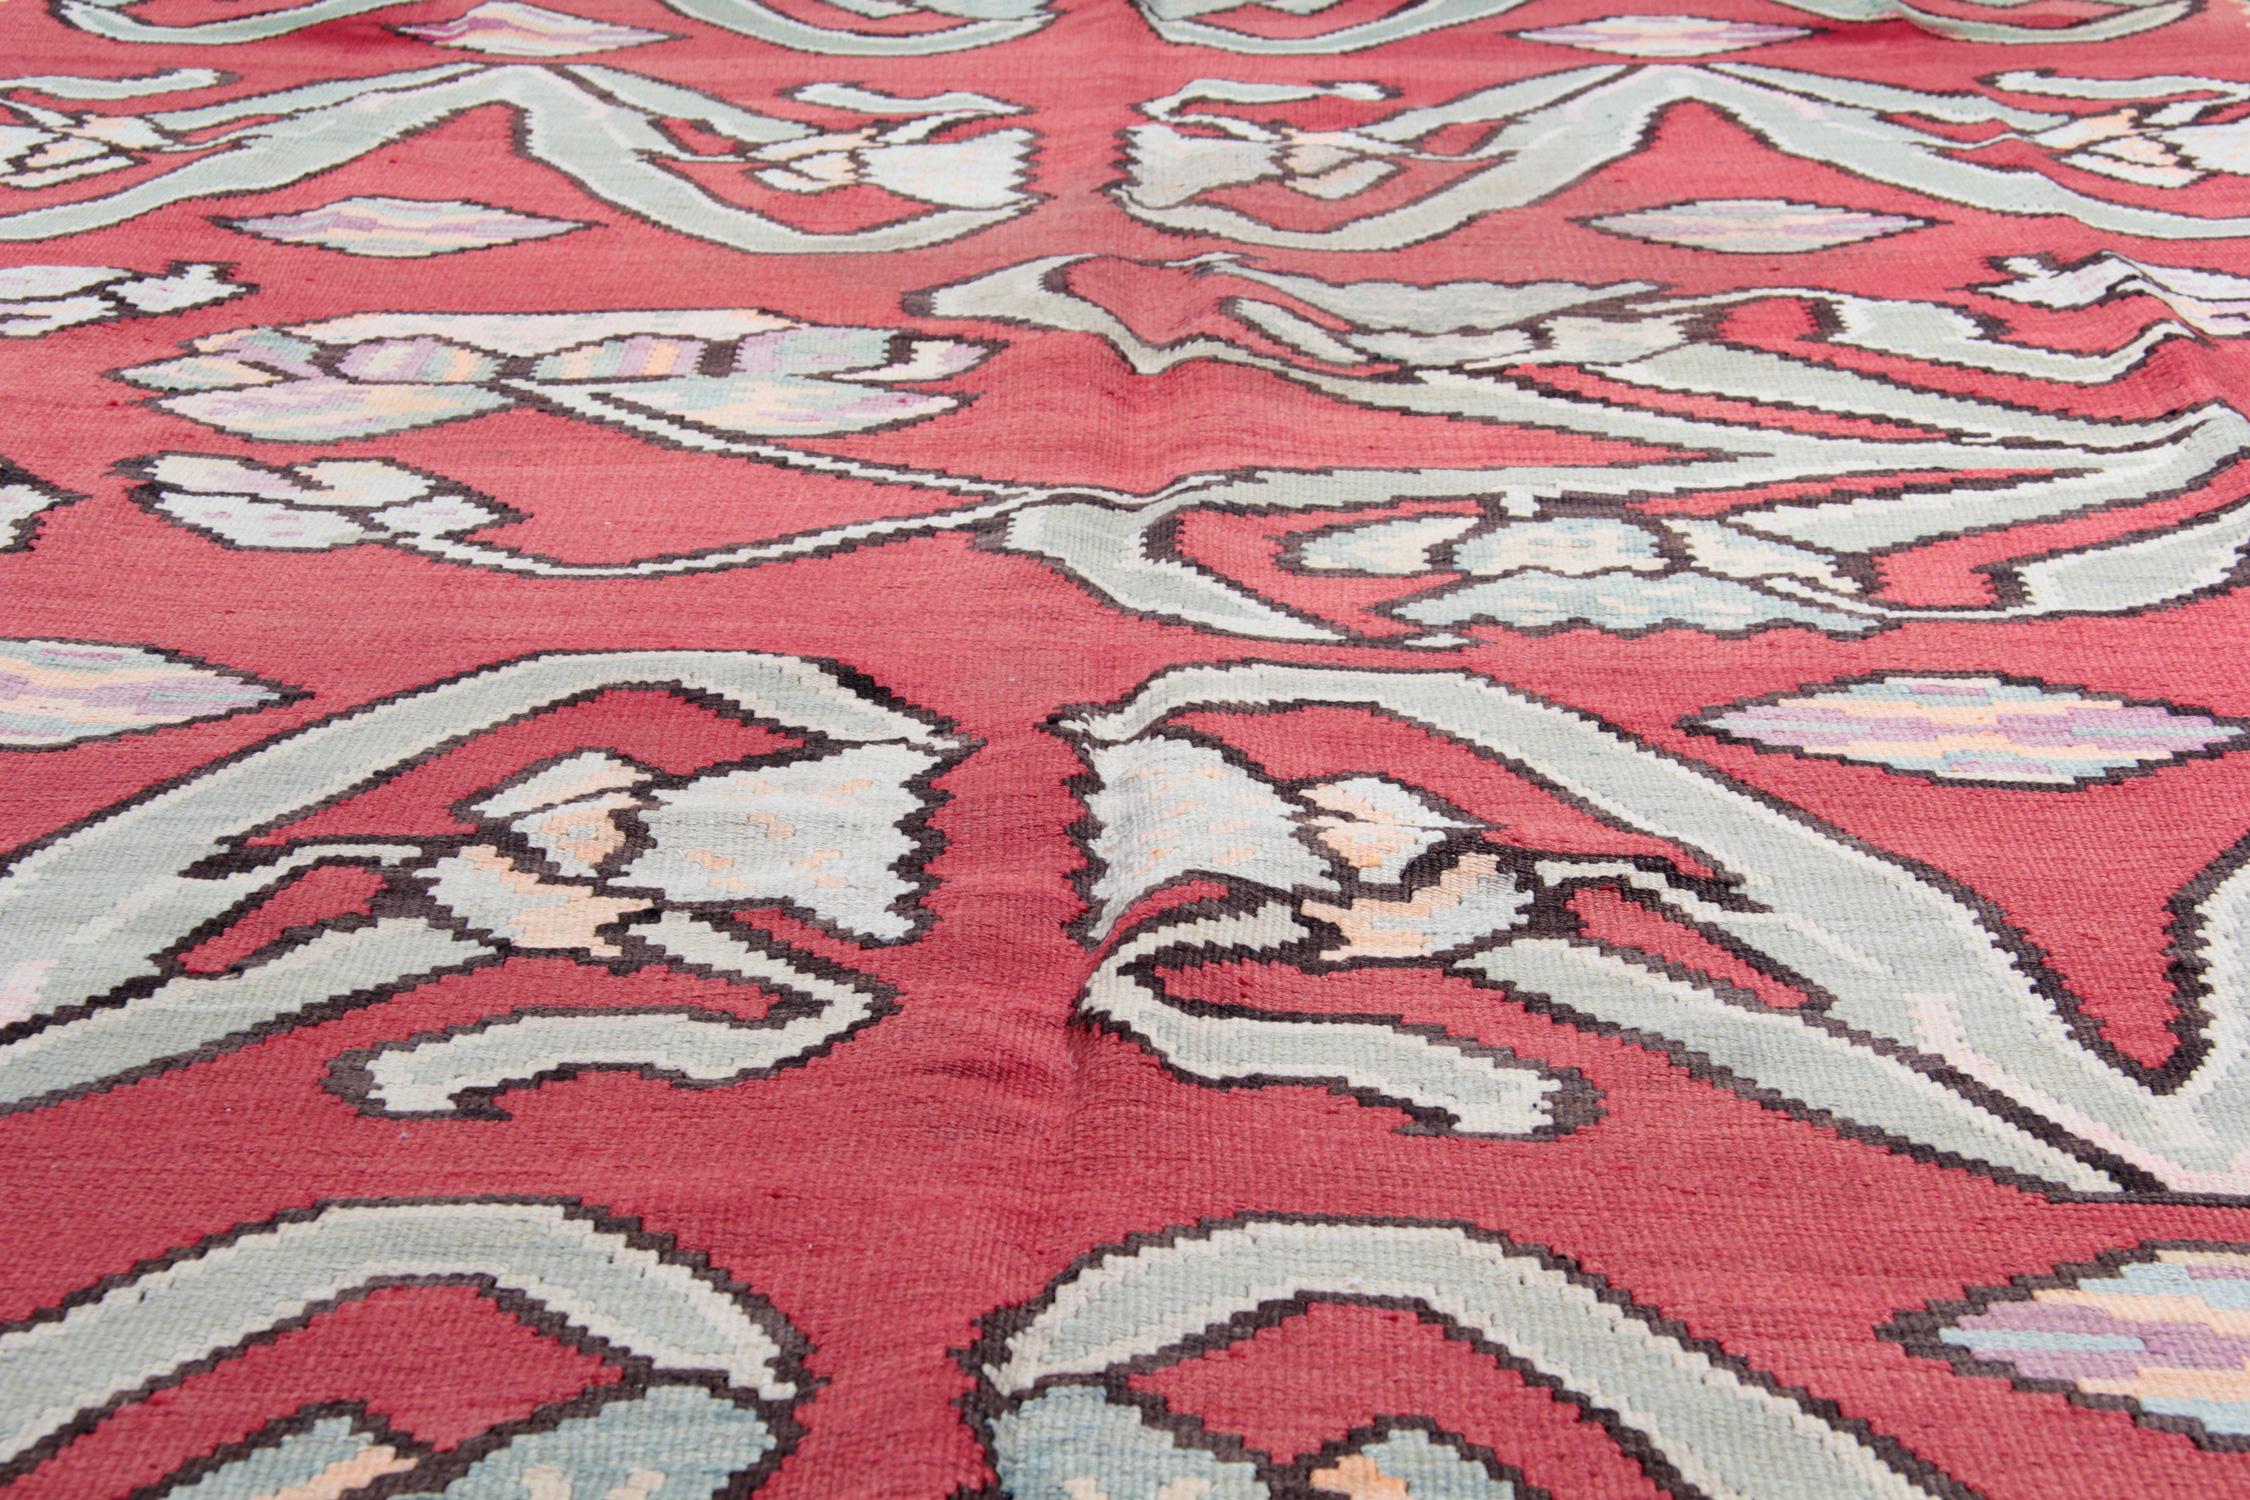 Mid-20th Century Primitive Antique Kilim Rugs, Traditional Red Rugs, Turkish Carpet from Anatolia